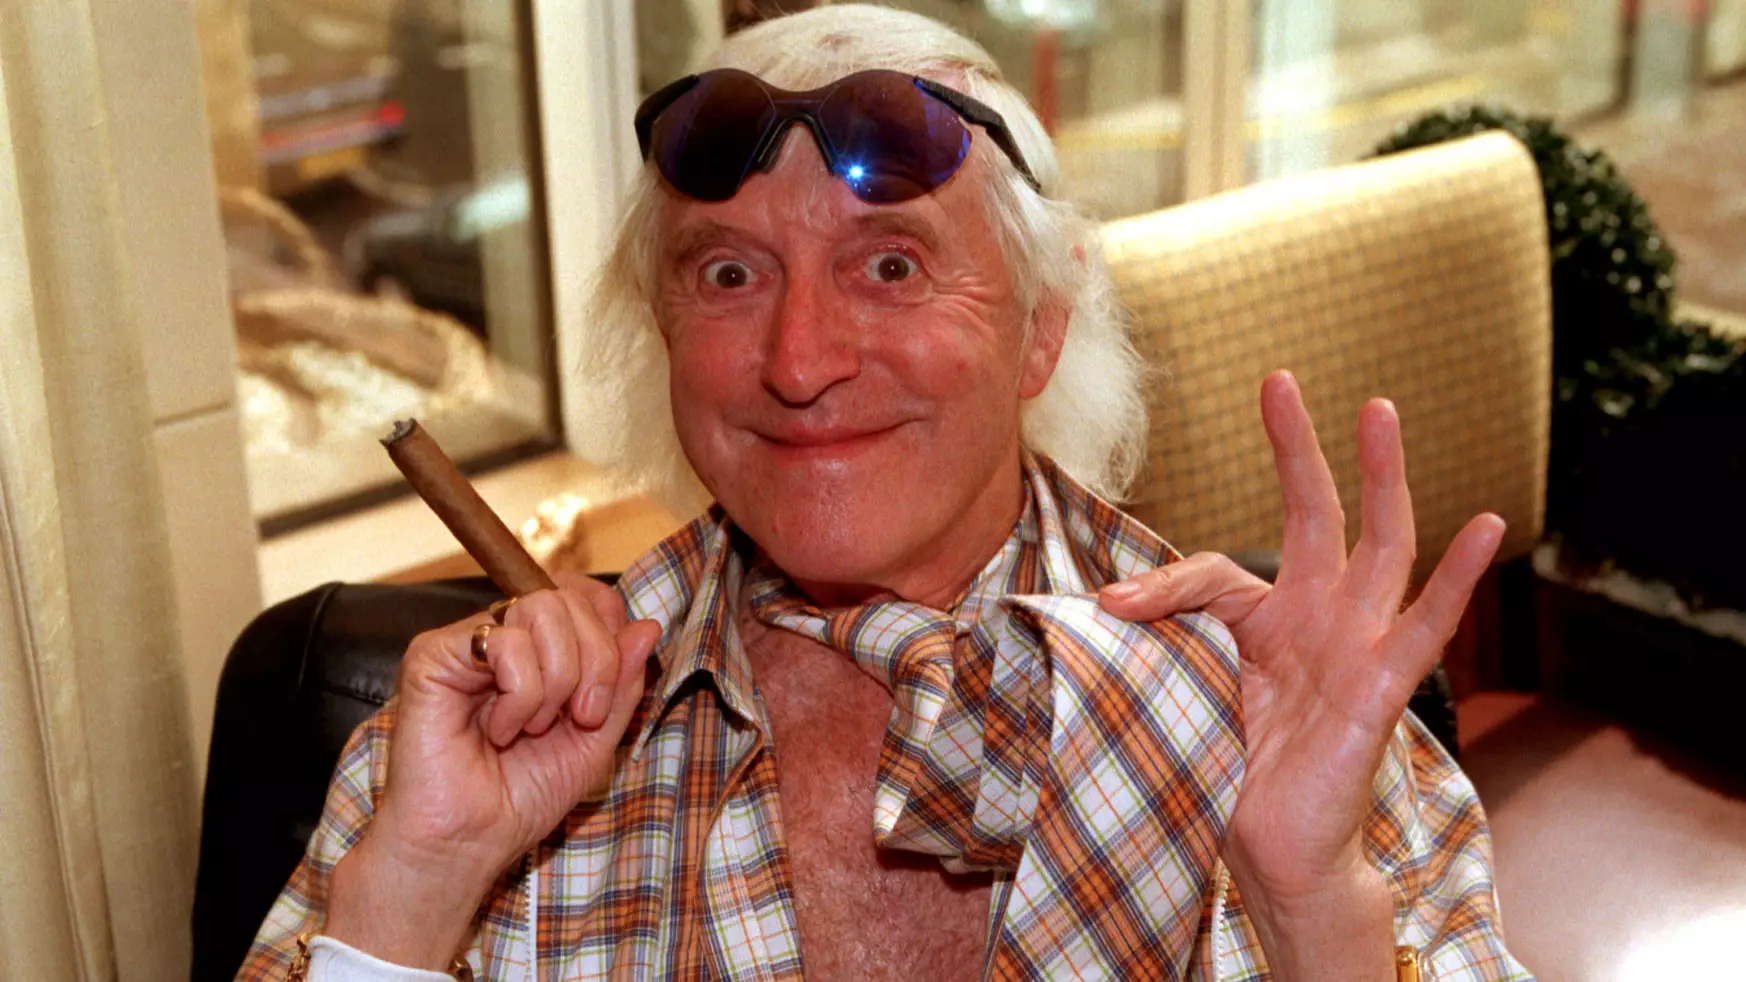 BBC Jimmy Savile Drama Branded 'Disgusting' And Hypocritical